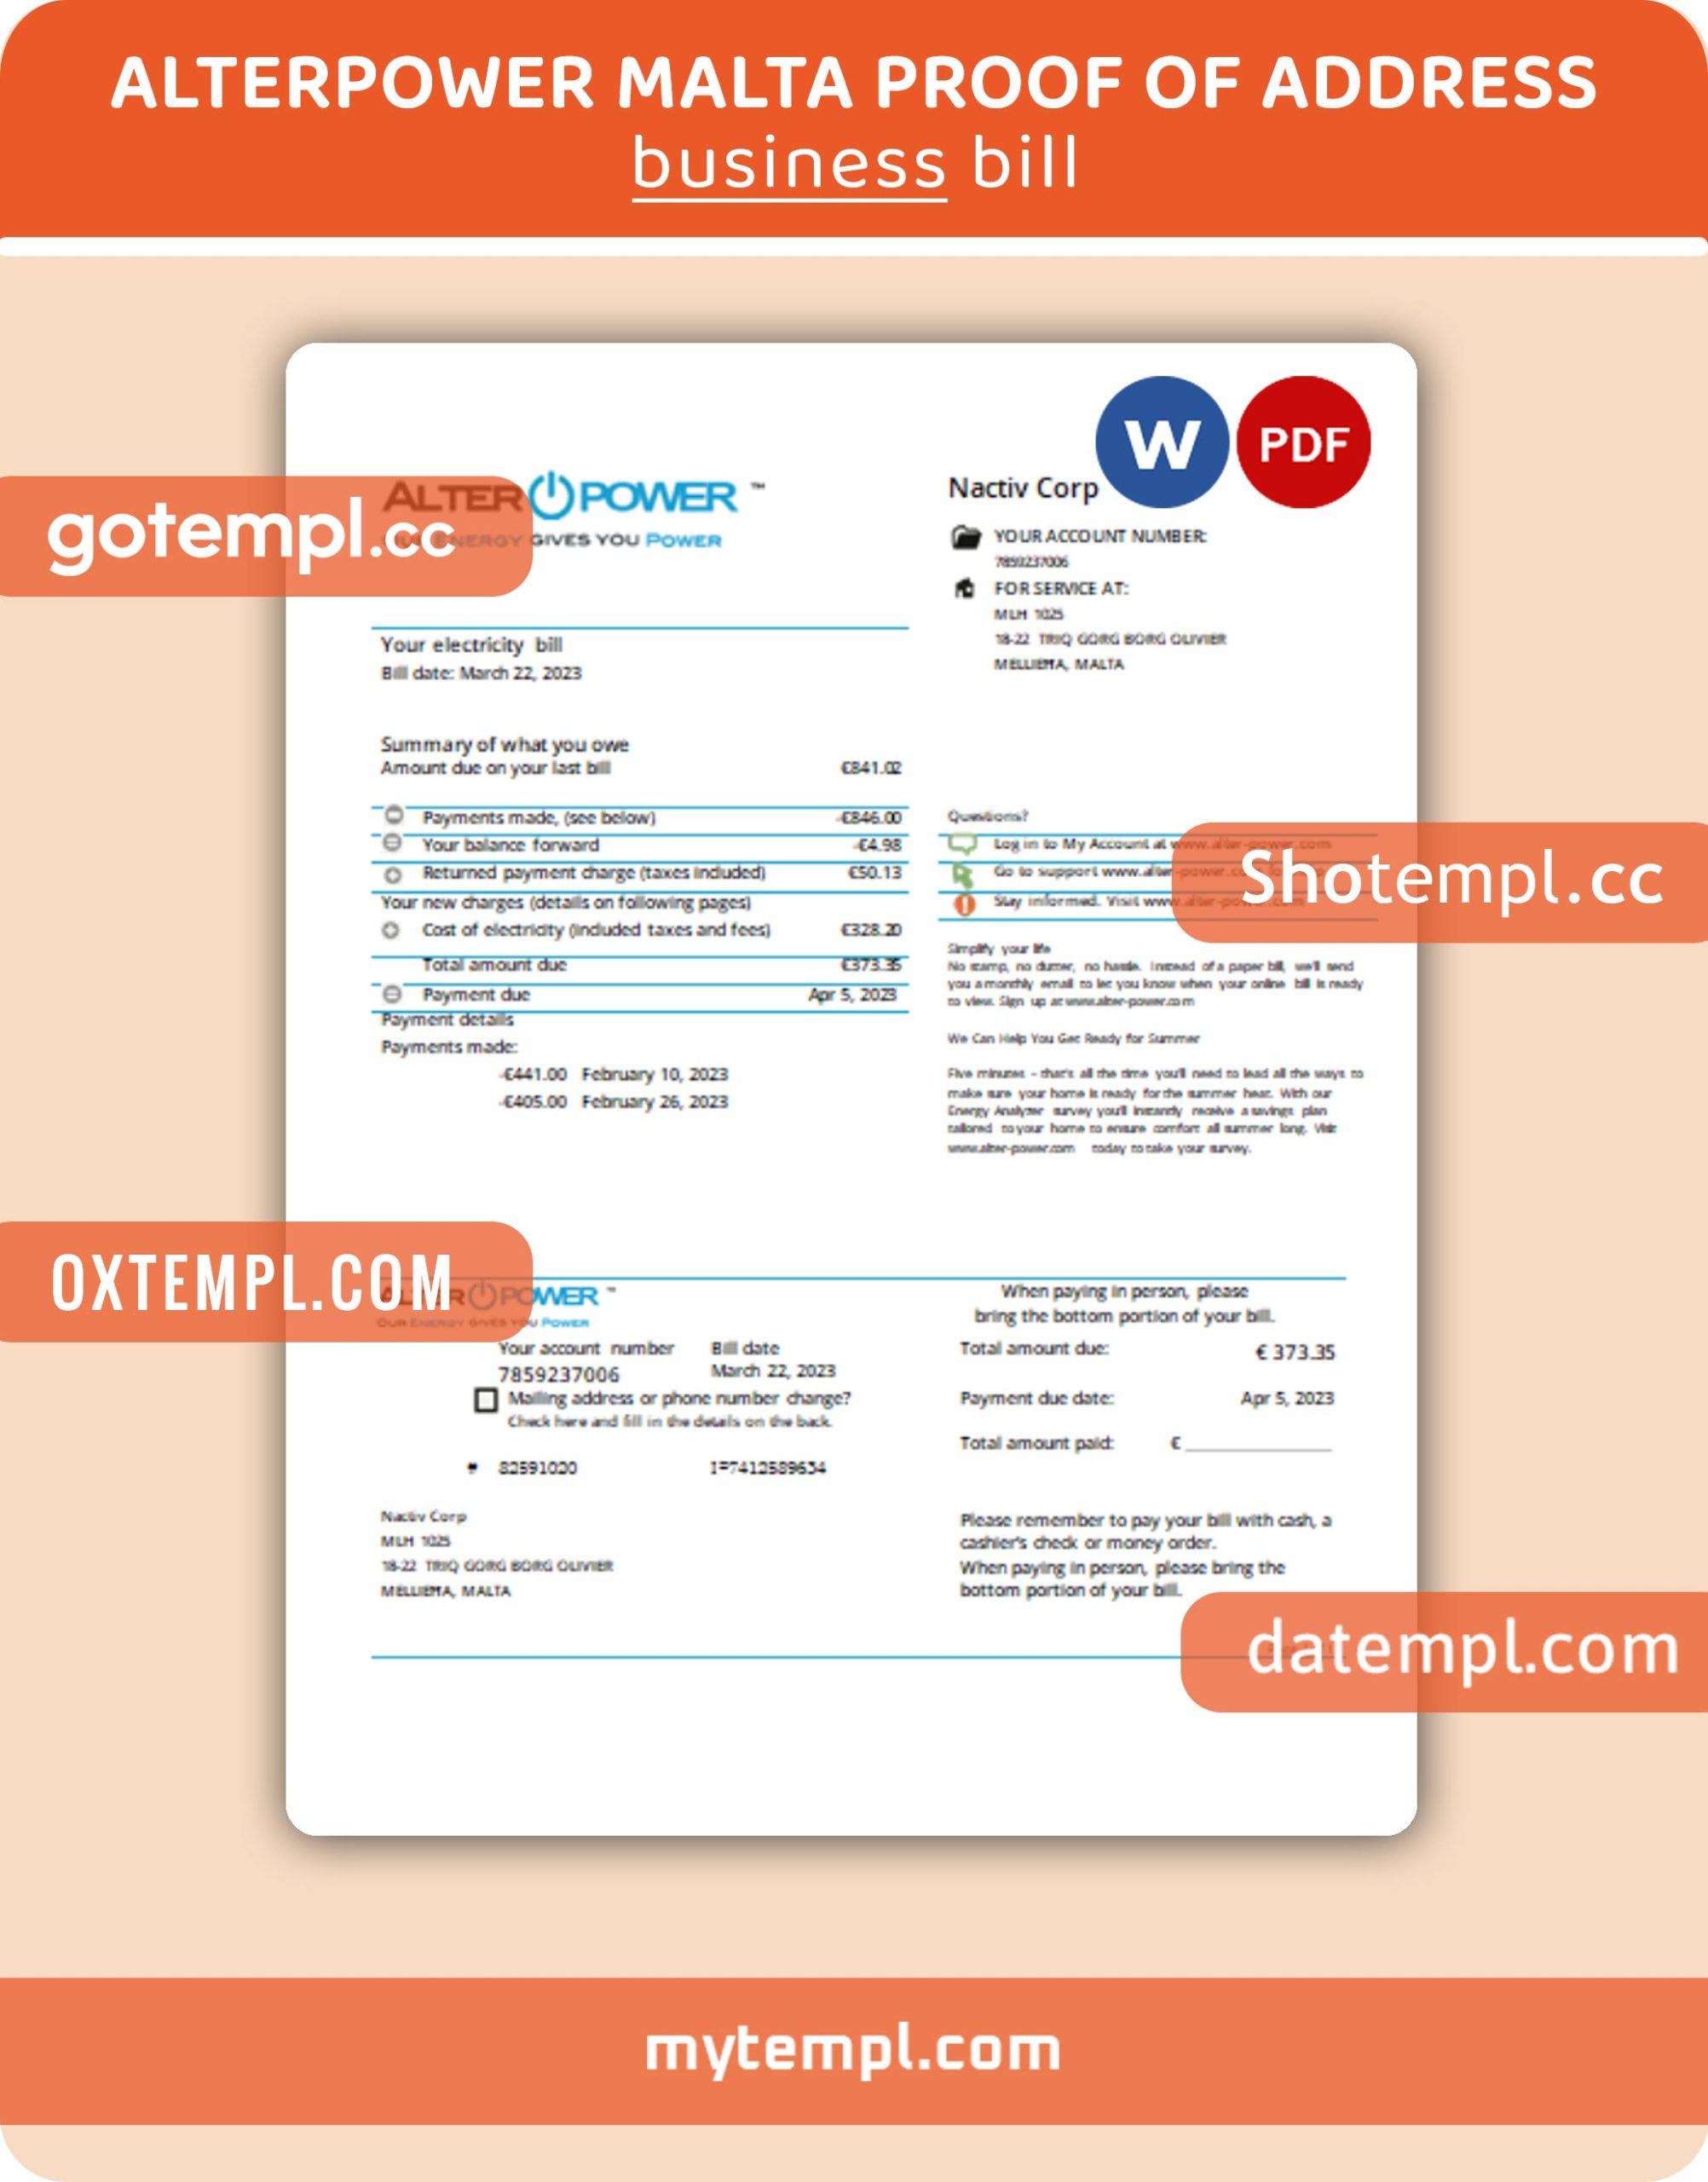 Virgin Media business utility billl, PDF and WORD template